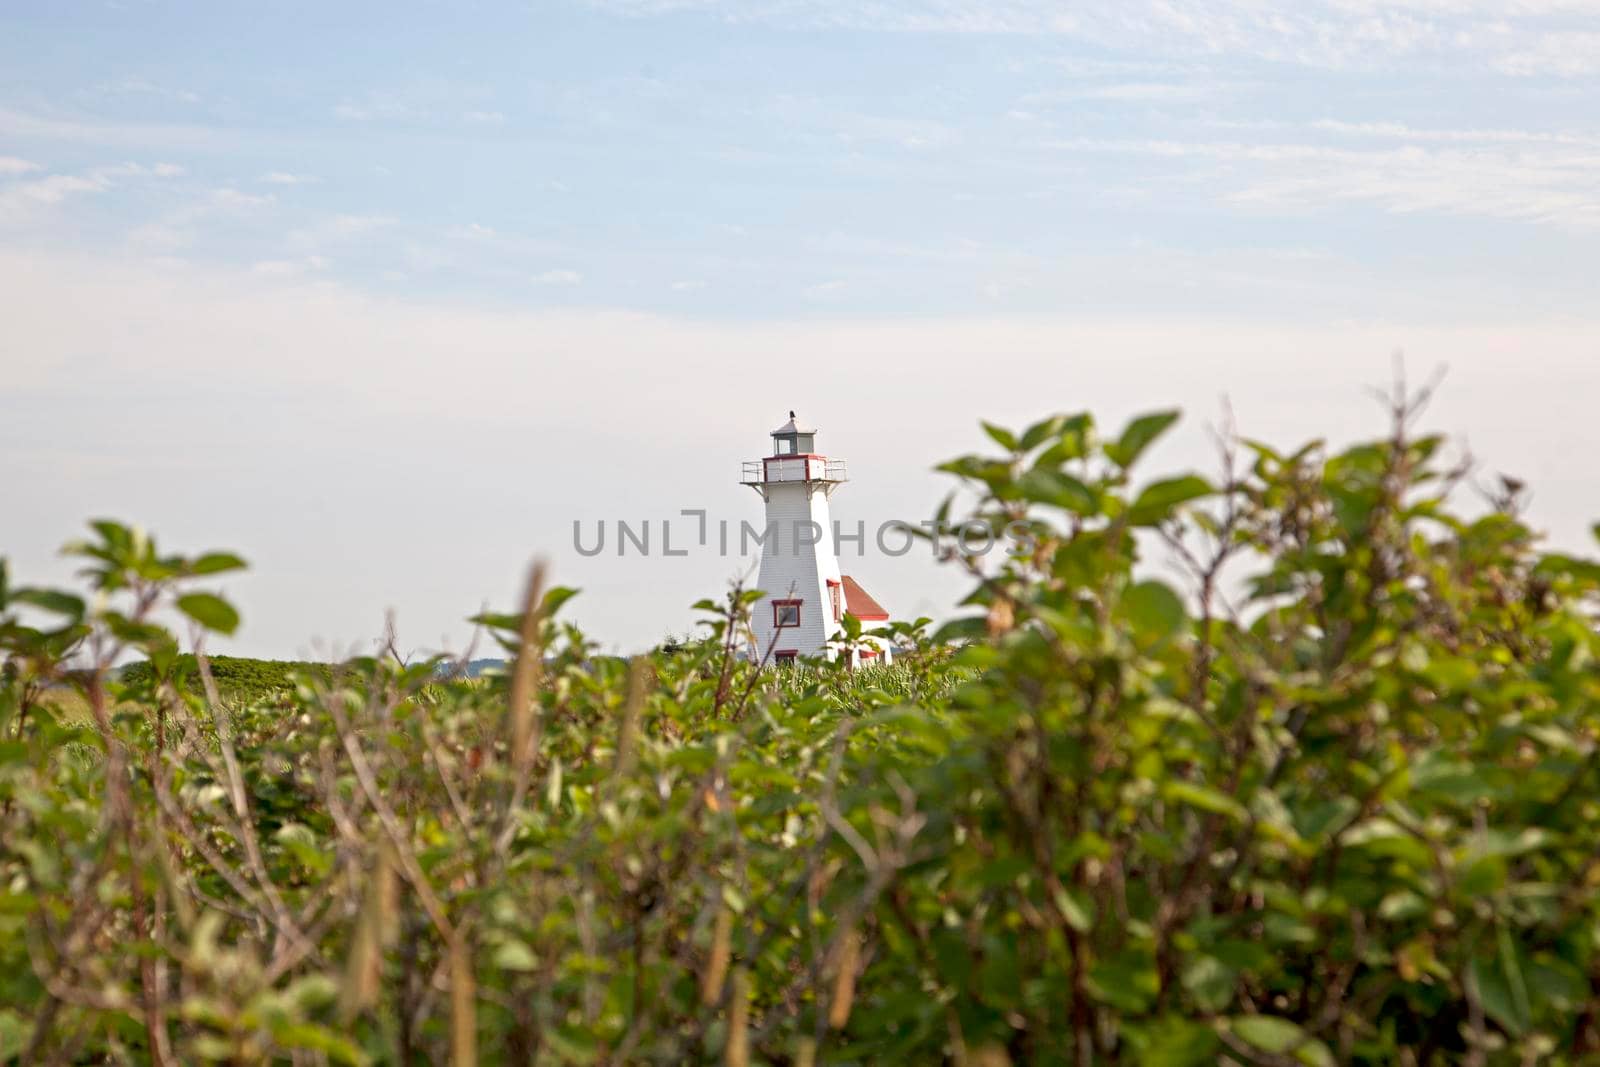 July 27, 2019 - French River, PEI: Looking across the summer grass to the lighthouse in French River, Prince Edward Island